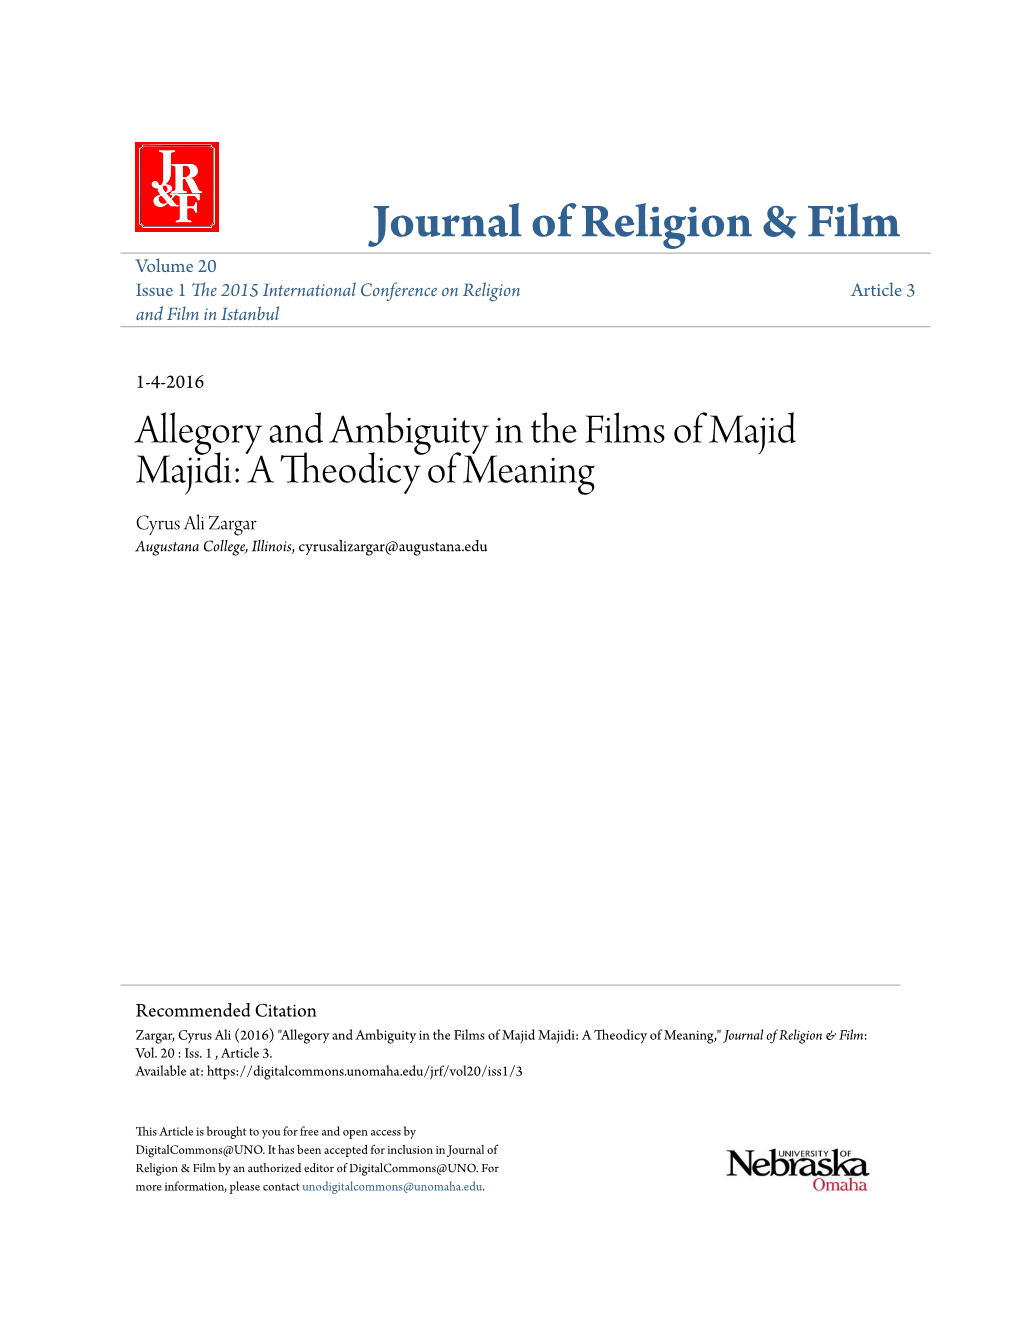 Allegory and Ambiguity in the Films of Majid Majidi: a Theodicy of Meaning Cyrus Ali Zargar Augustana College, Illinois, Cyrusalizargar@Augustana.Edu